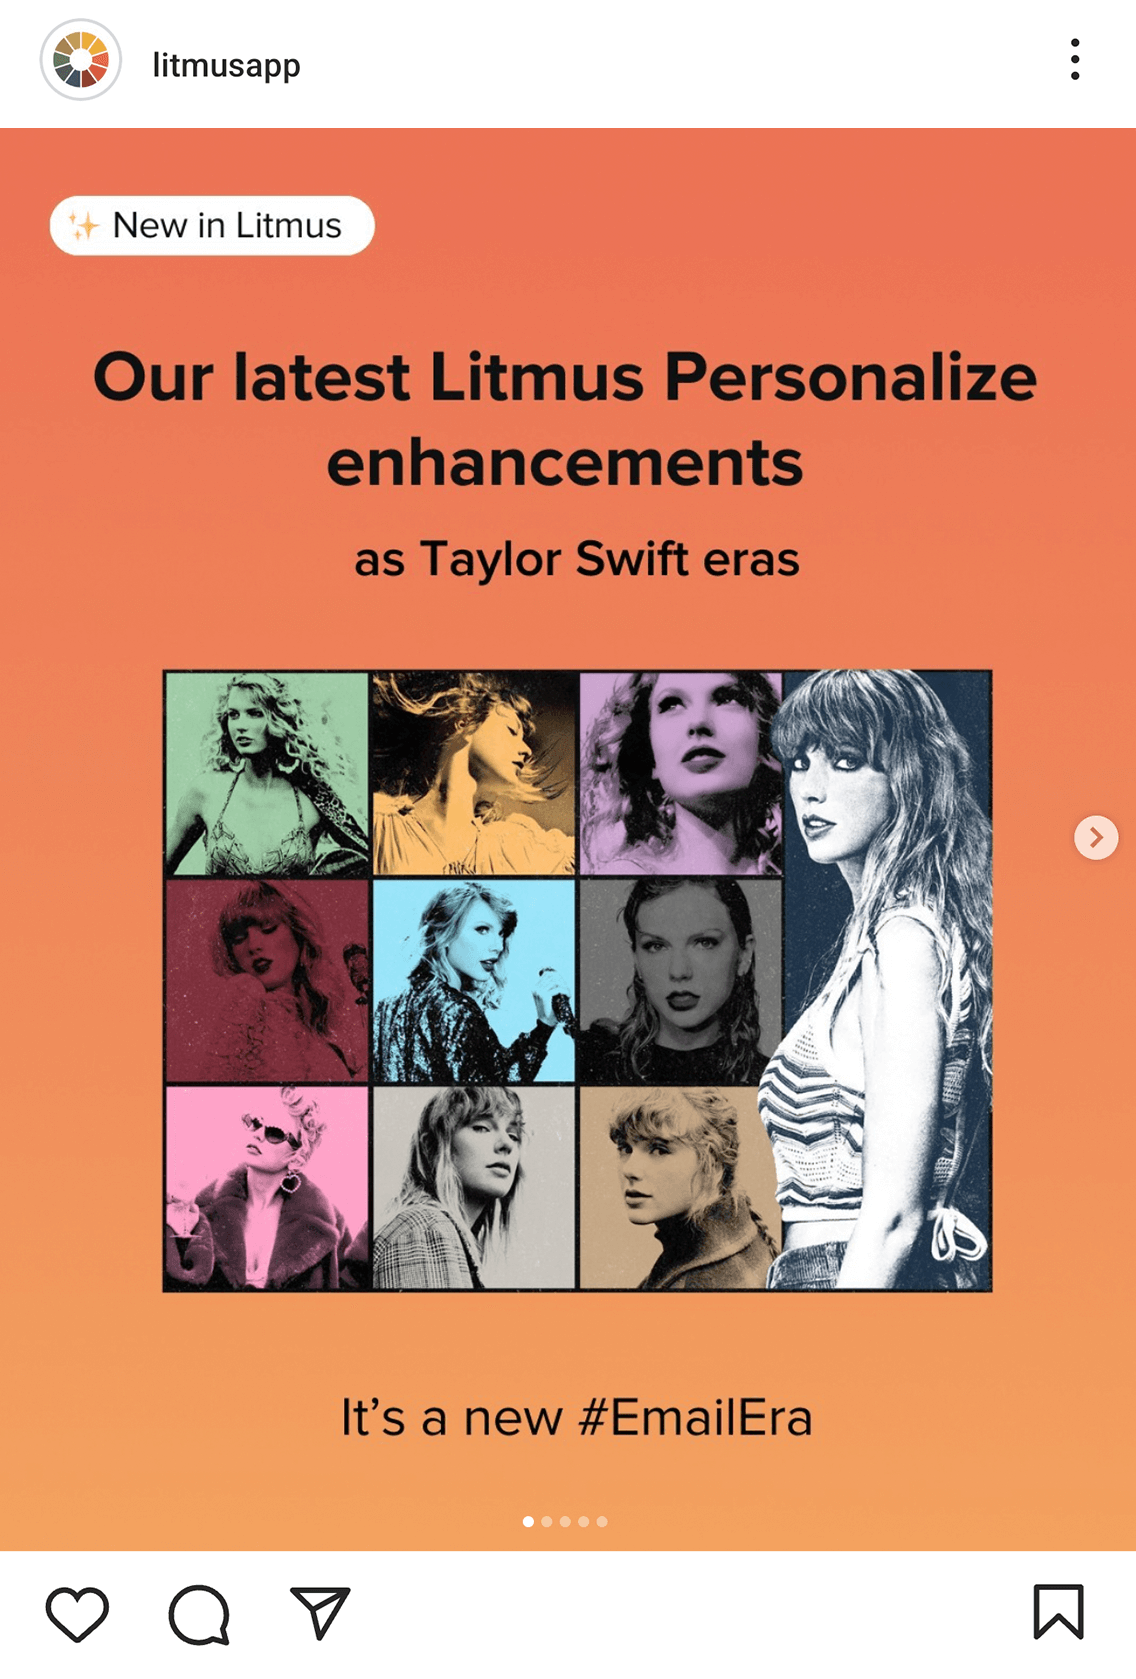 @litmusapp on Instagram's post, which says: 'New in Litmus. Our latest Litmus Personalize elements as Taylor Swift eras. It's a new #EmailEra'